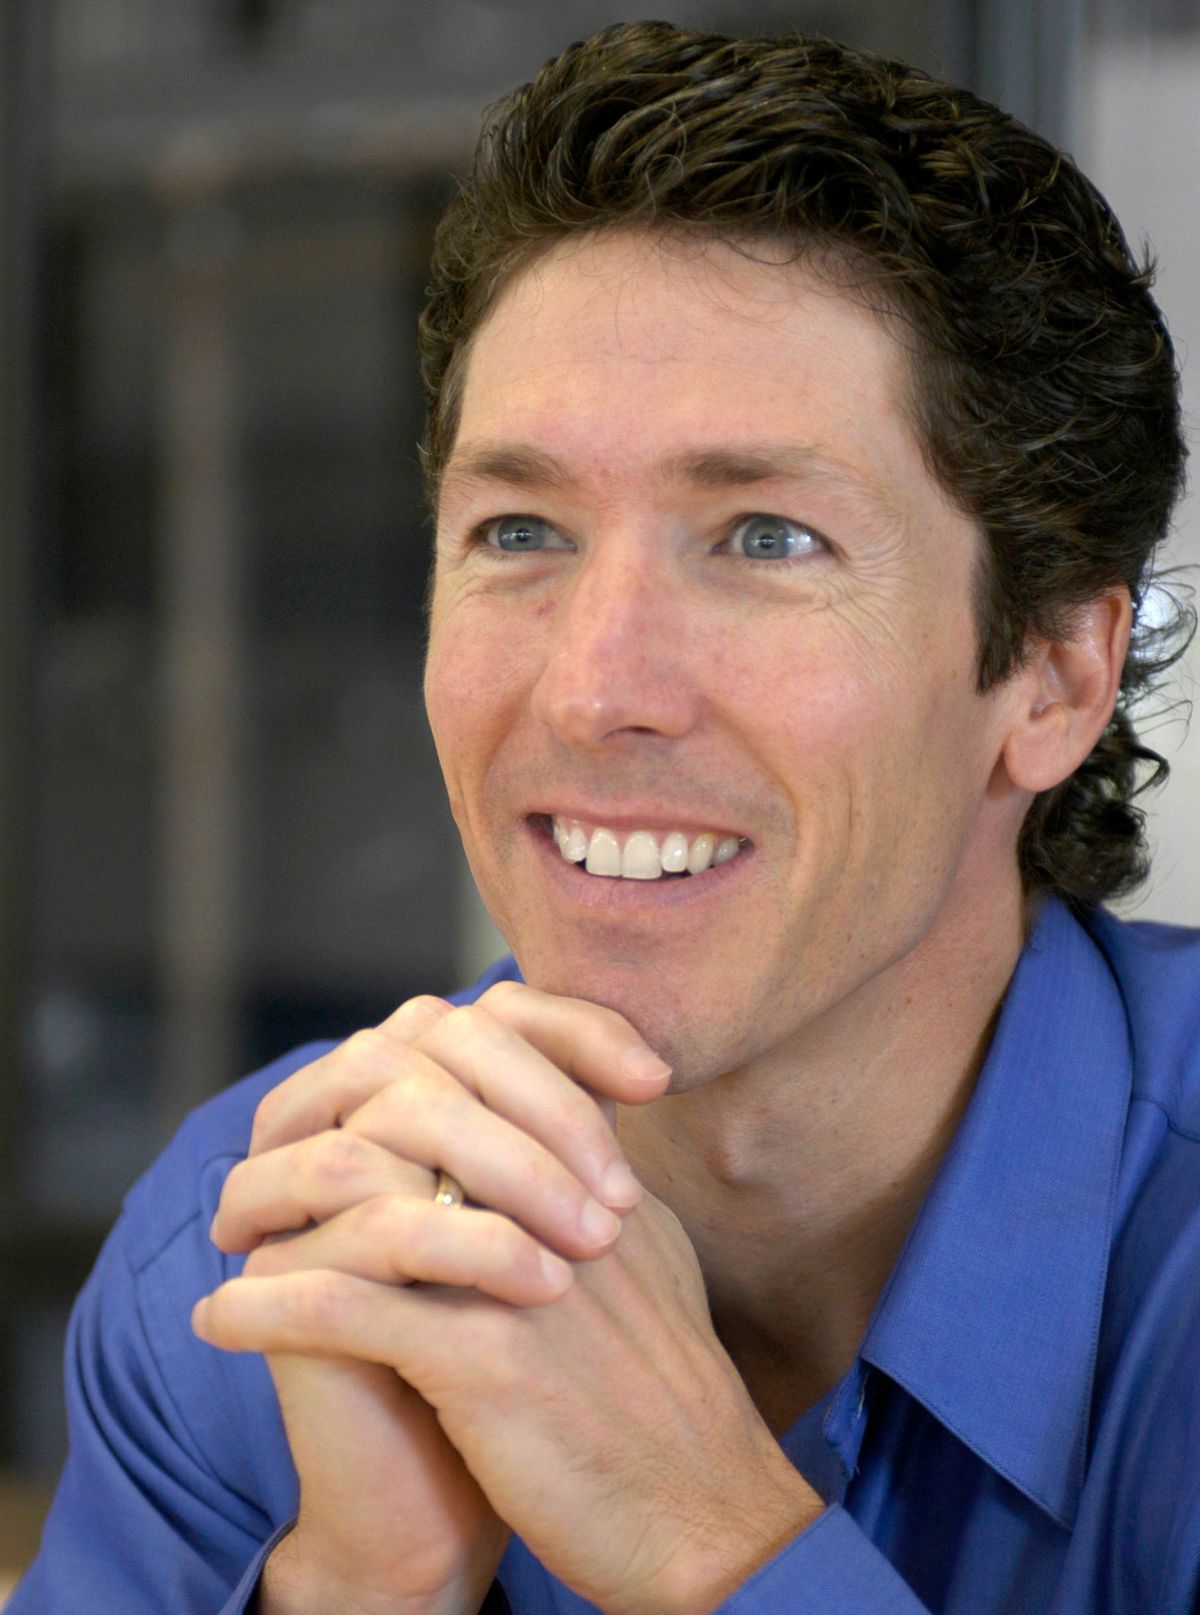 FILE - Lakewood Church pastor Joel Osteen smiles during an interview in the former basketball arena that has become the new home for the church in Houston, in this  Sept. 20, 2004, file photo. Authorities are investigating after $600,000 in checks and cash was stolen from a safe at Pastor Joel Osteen's Houston megachurch, which has one of the largest congregations in the country. Police spokesman Kese Smith said Tuesday March 11, 2014 $200,000 in cash and $400,000 in checks were stolen from a safe sometime between 2:30 p.m. Sunday and 8:30 a.m. Monday. (AP Photo/Pat Sullivan) (AP Photo/Pat Sullivan)